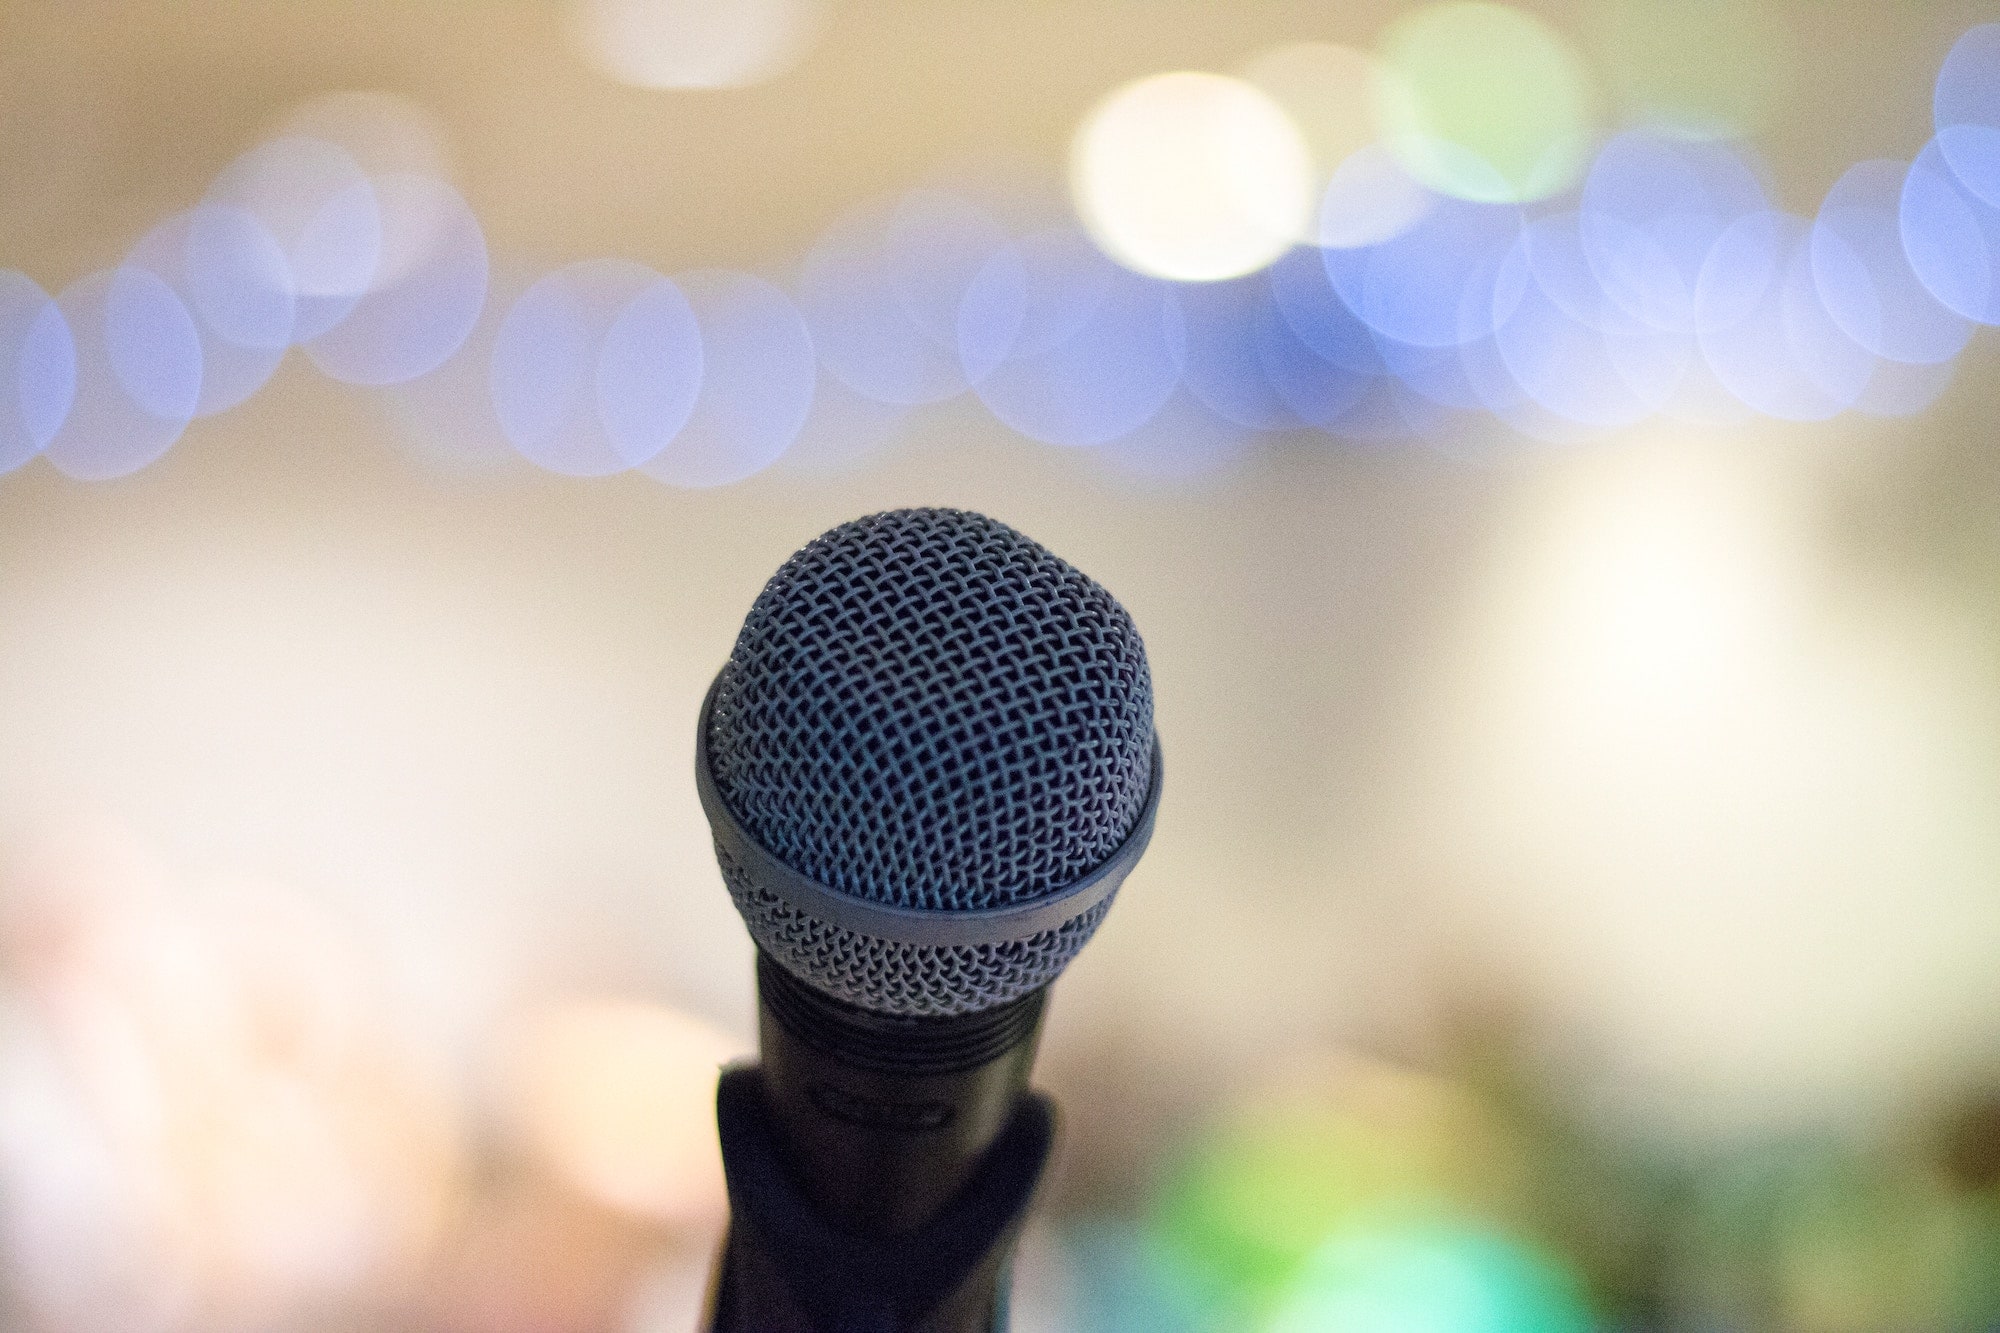 Blurred image of a microphone